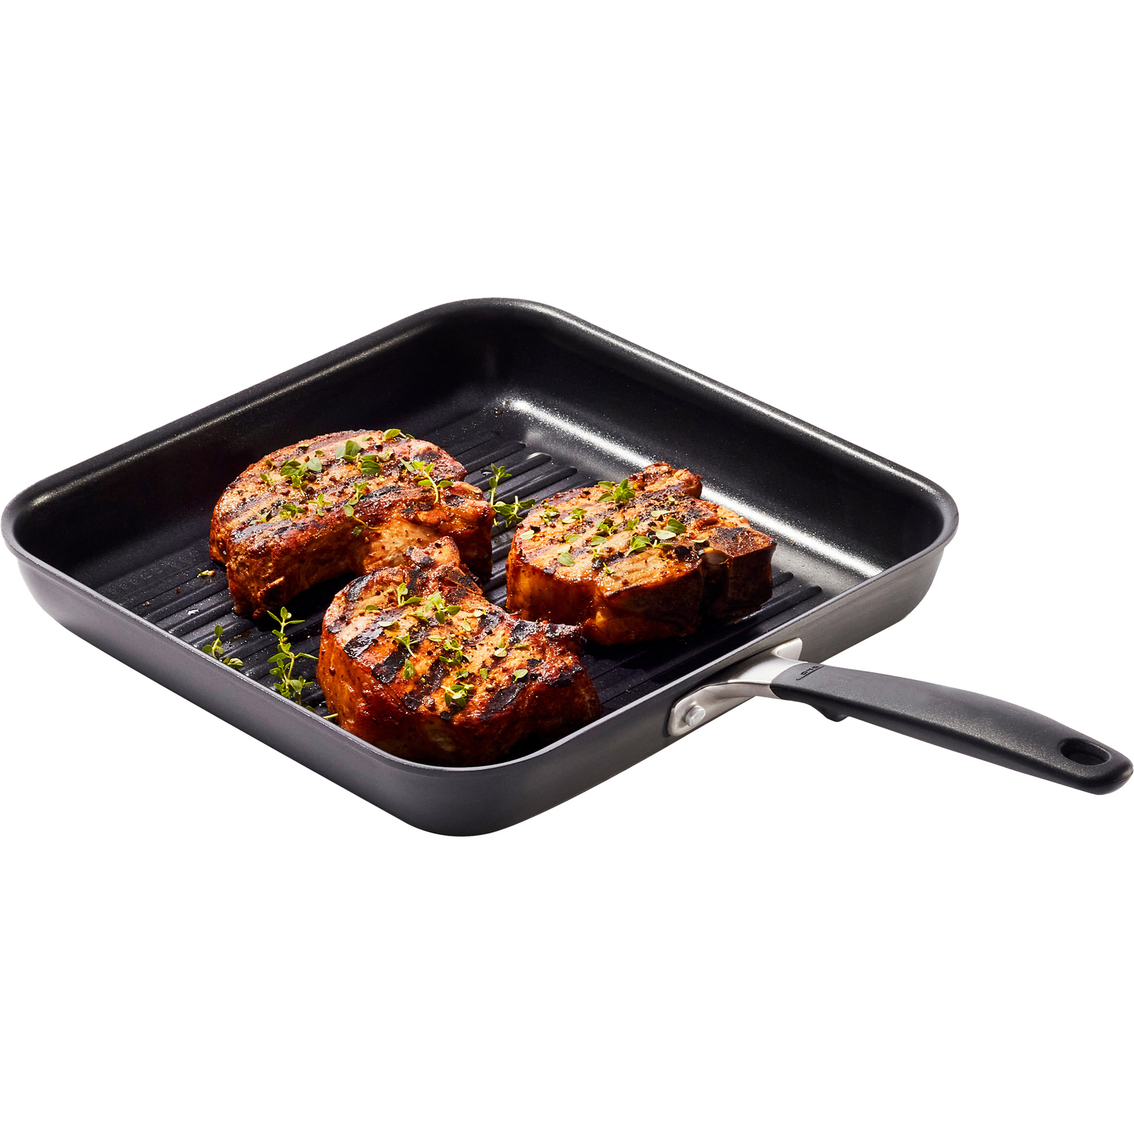 Oxo Good Grips Non Stick 11 in. Grill Pan - Image 2 of 3